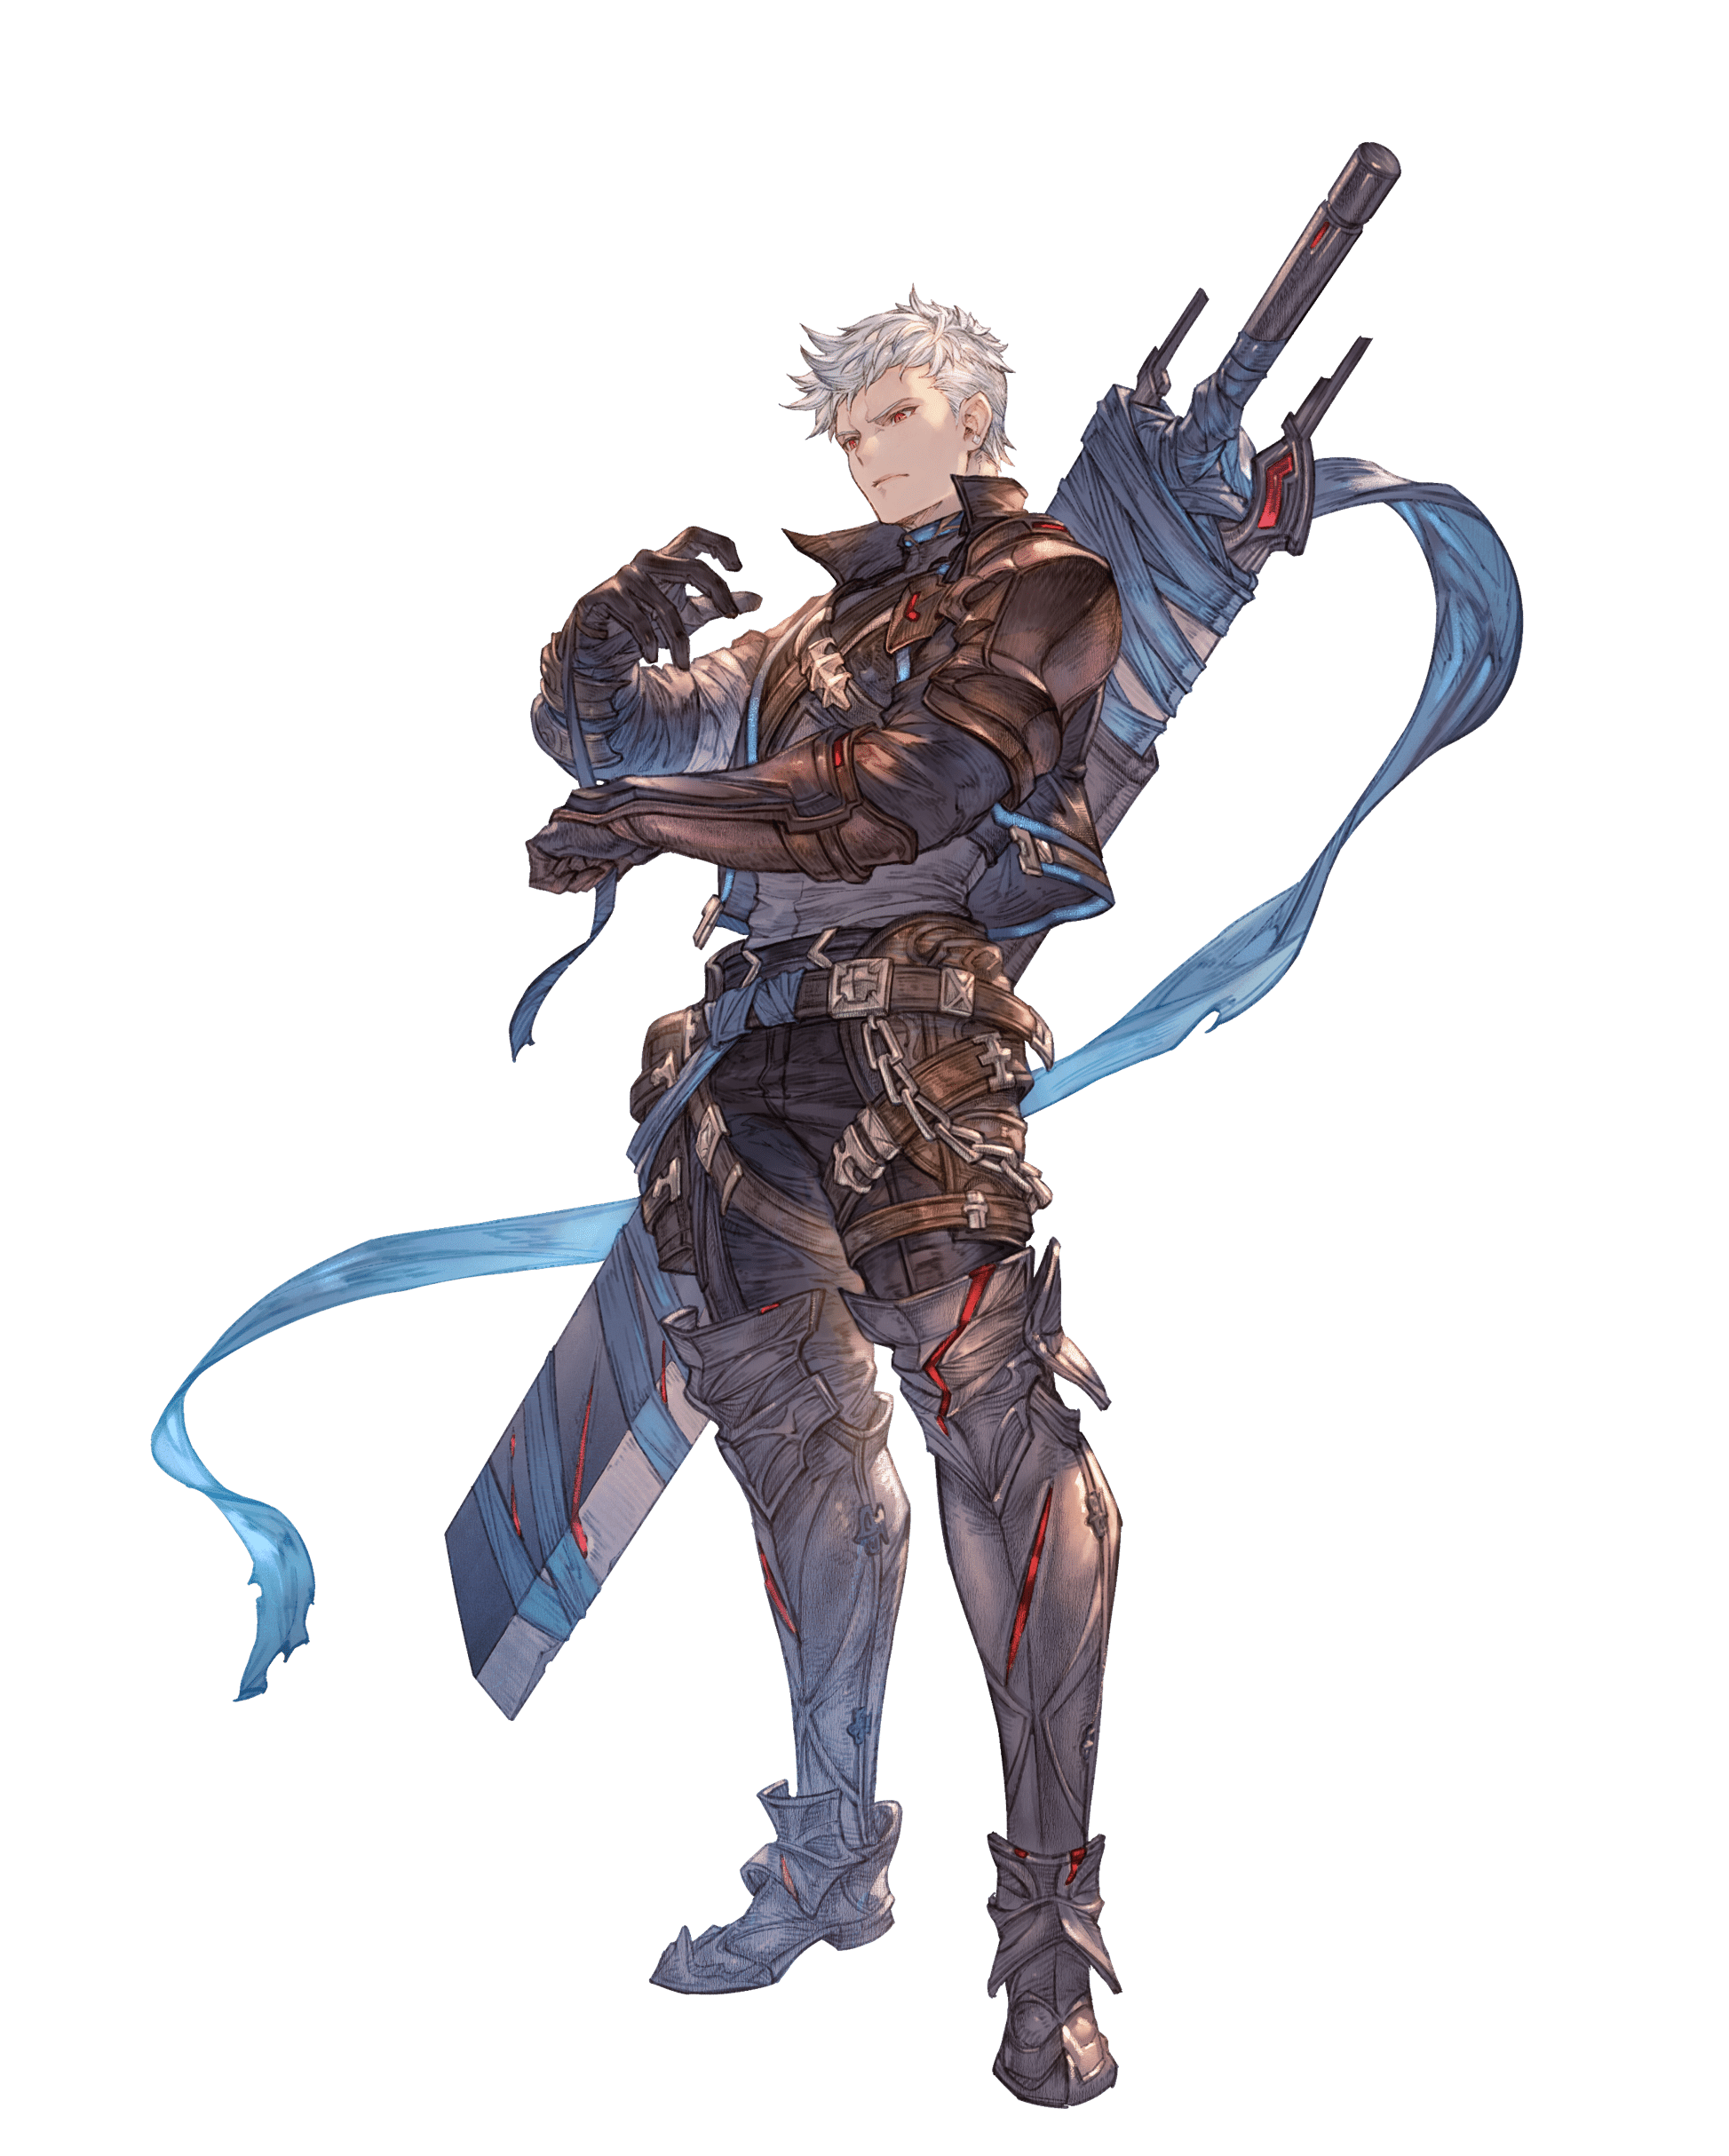 Granblue Fantasy: Relink gets second trailer and gameplay, still set for  2023 release - Niche Gamer